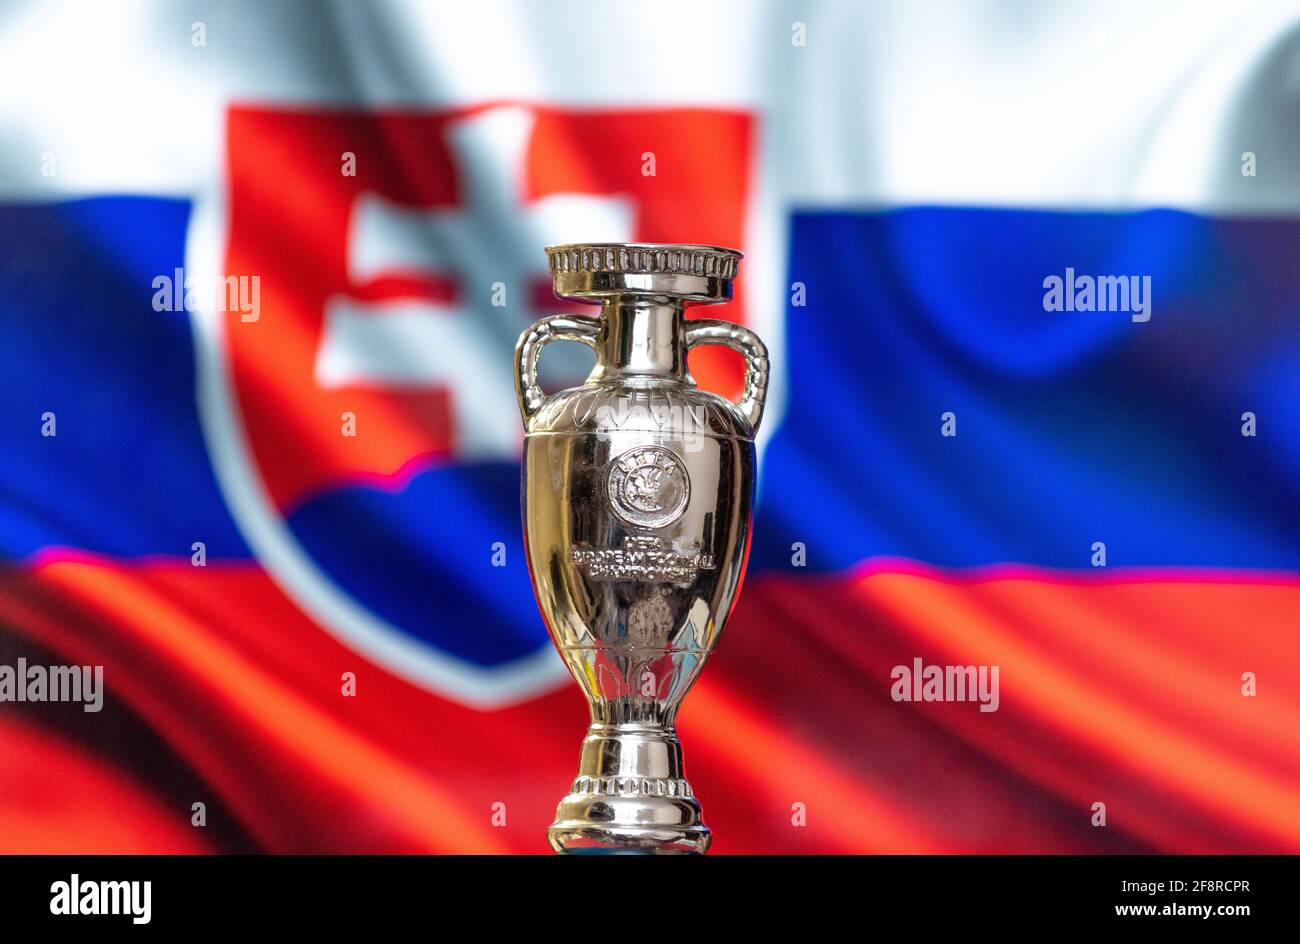 April 10, 2021. Bratislava, Slovakia. UEFA European Championship Cup with the Slovakian flag in the background. Stock Photo